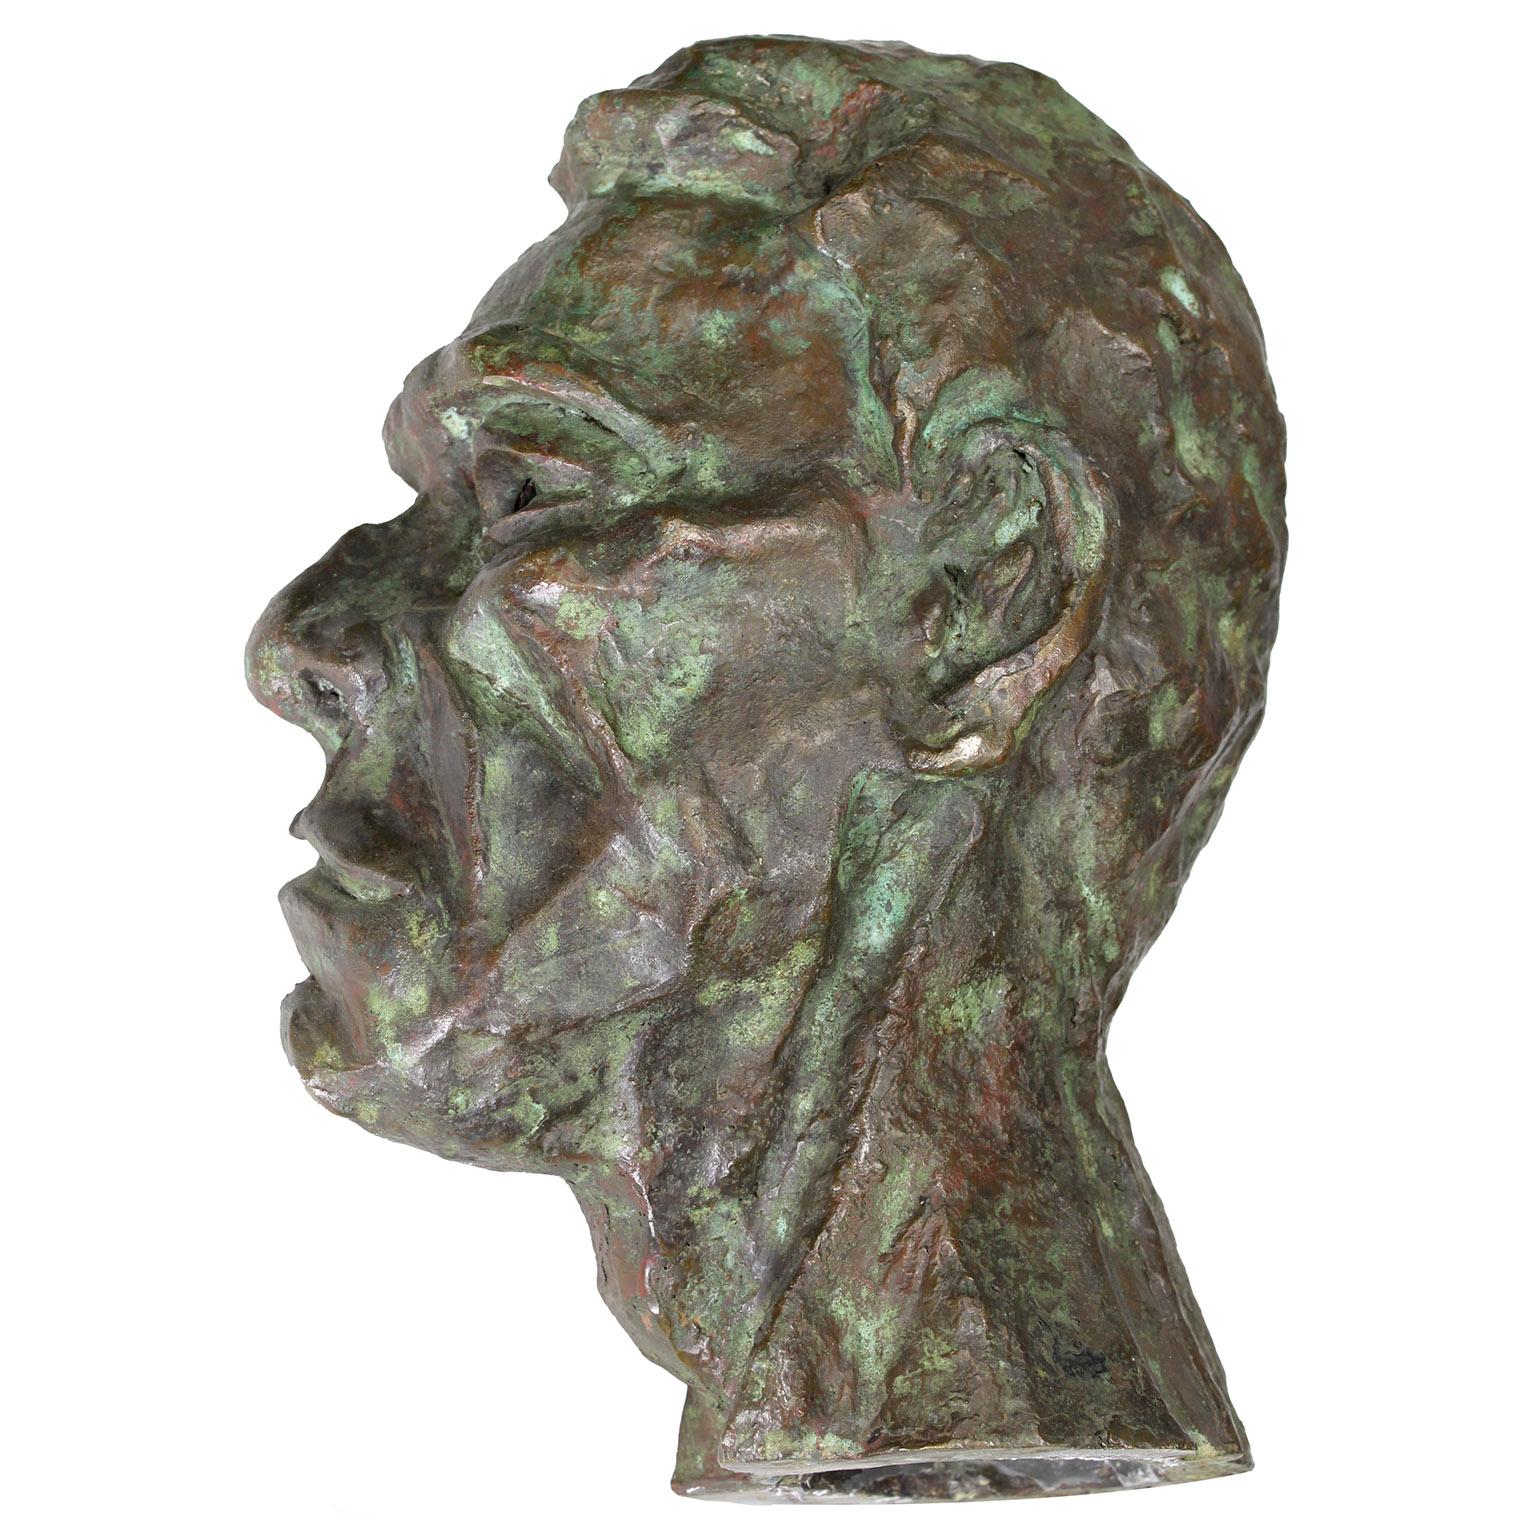 20th Century Fine Bronze Bust of a Man in Manner of Sir Jacob Epstein (British 1880-1959) For Sale